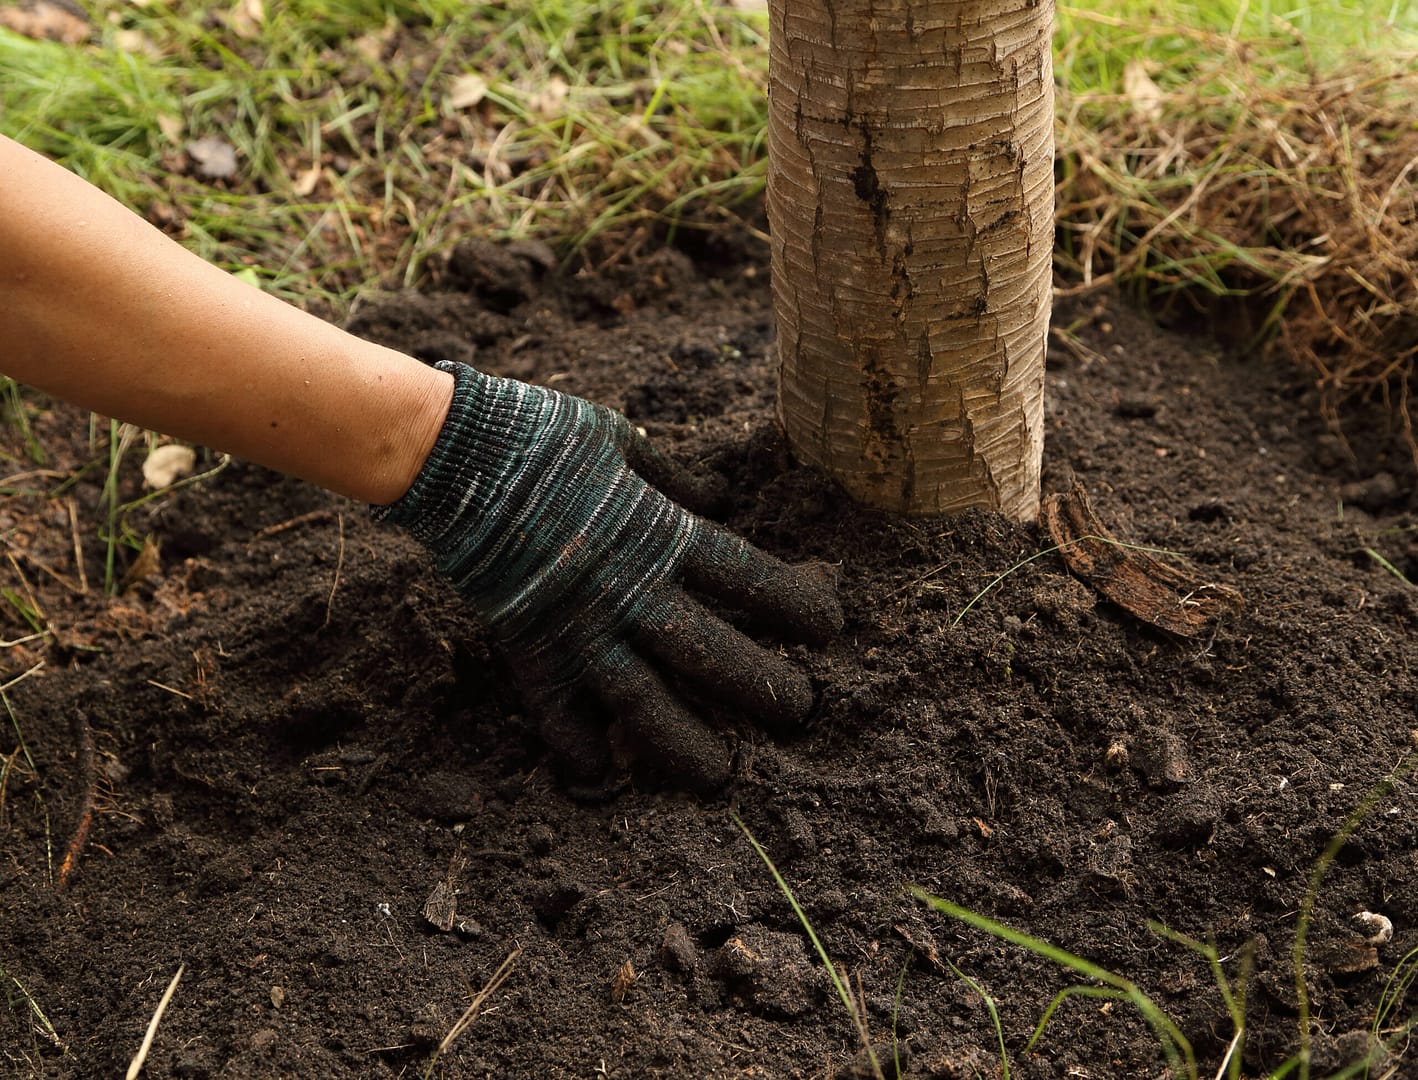 hand planted the tree in soil